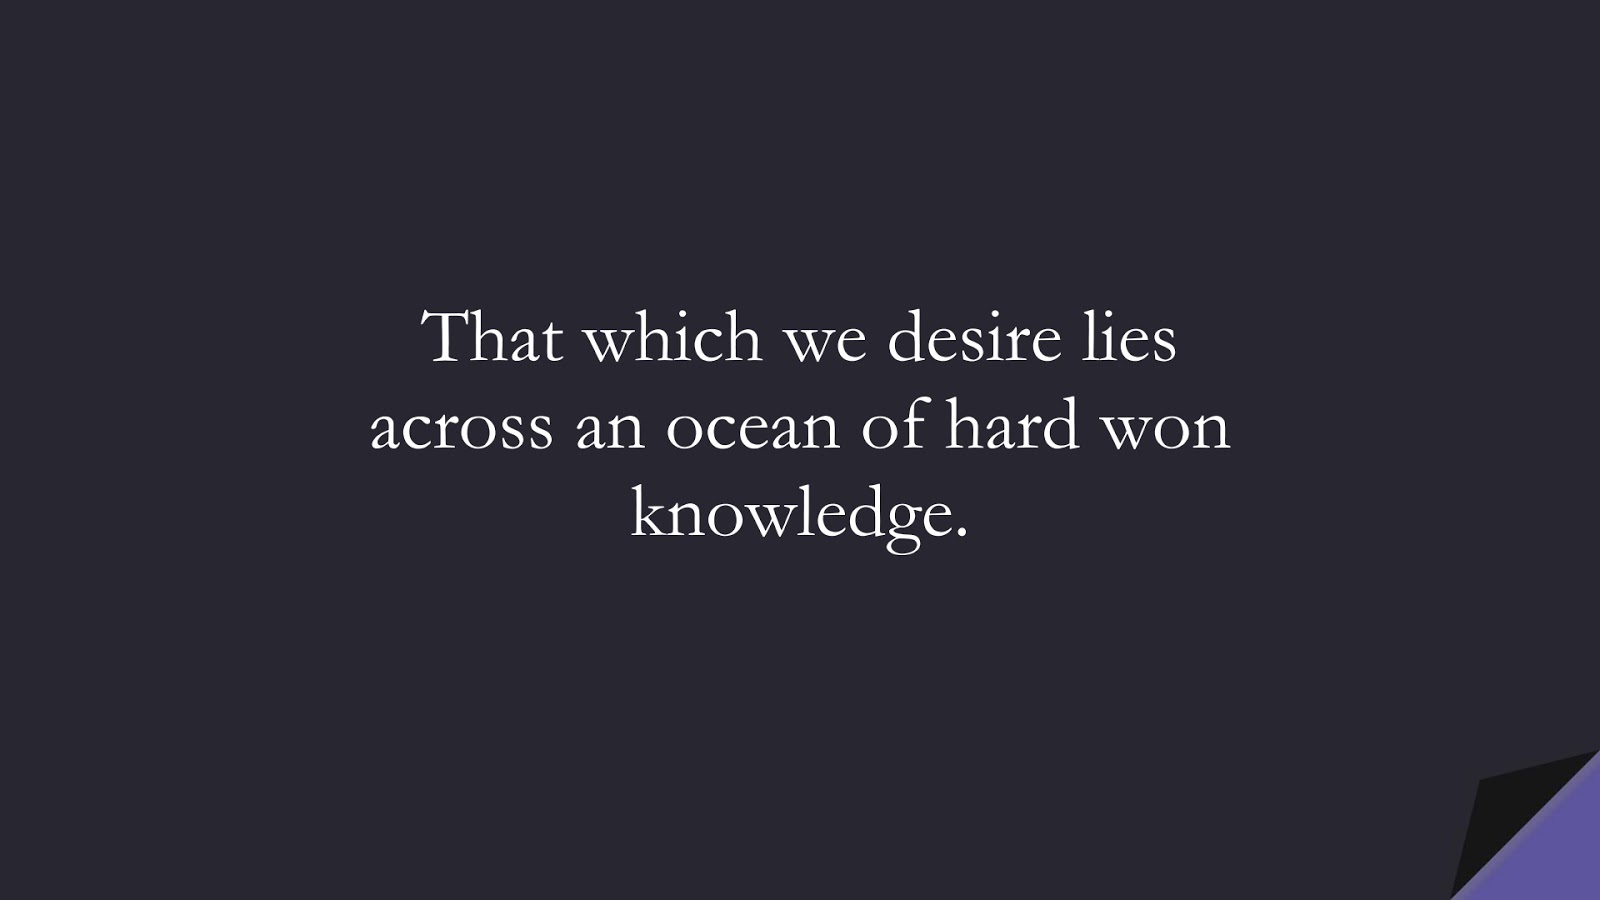 That which we desire lies across an ocean of hard won knowledge.FALSE